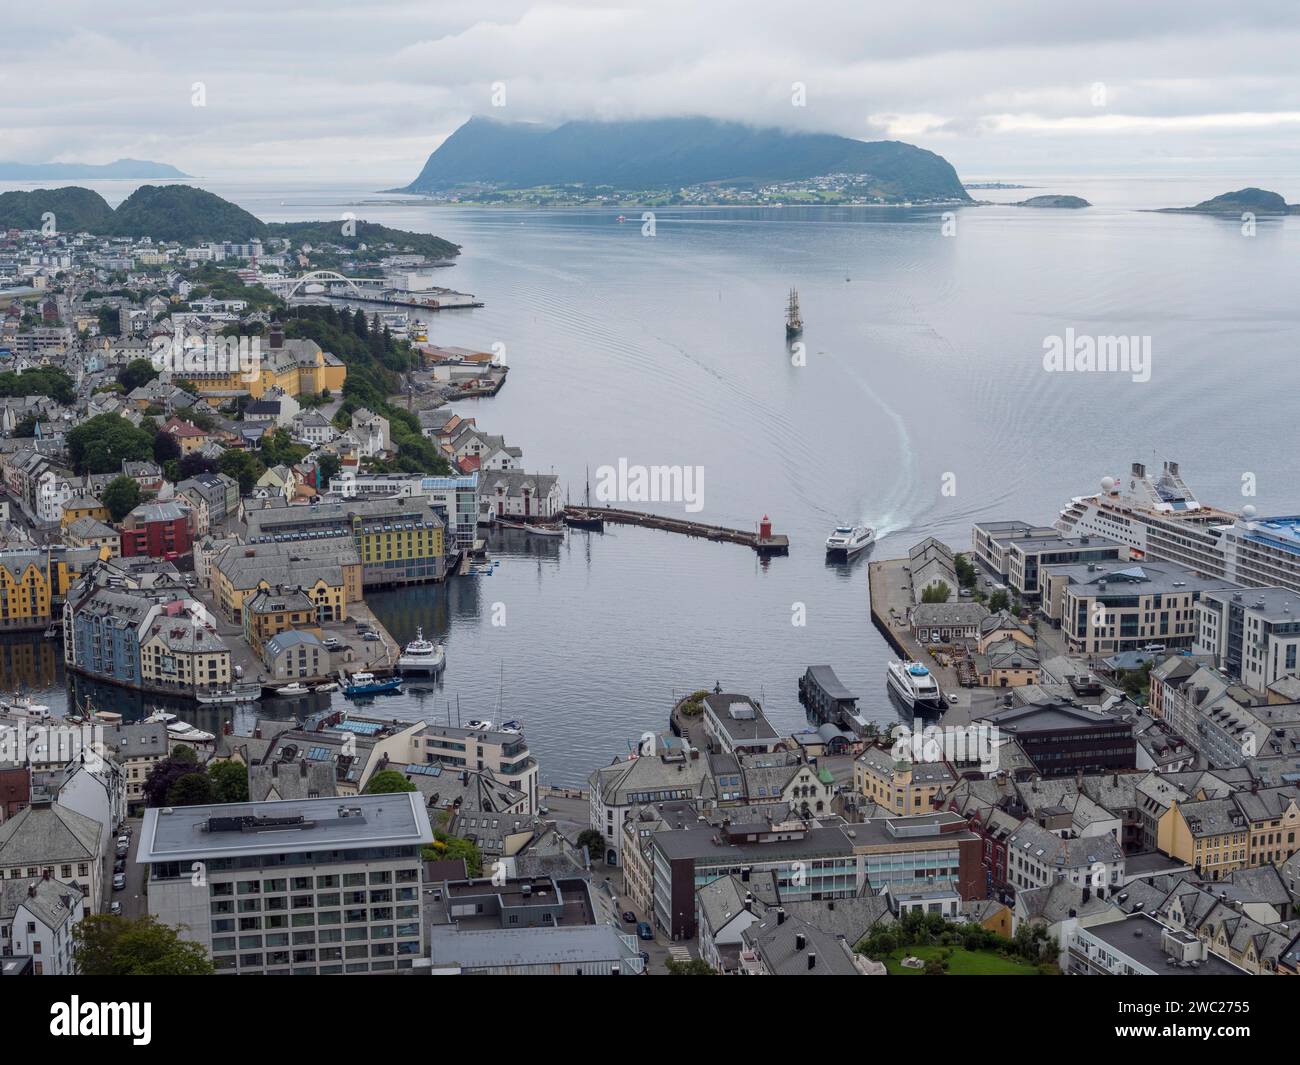 General view of the Ålesund harbour, Ålesund, Norway from the Askla/Fjellstua viewpoint with the island of Godøy in the distance. Stock Photo